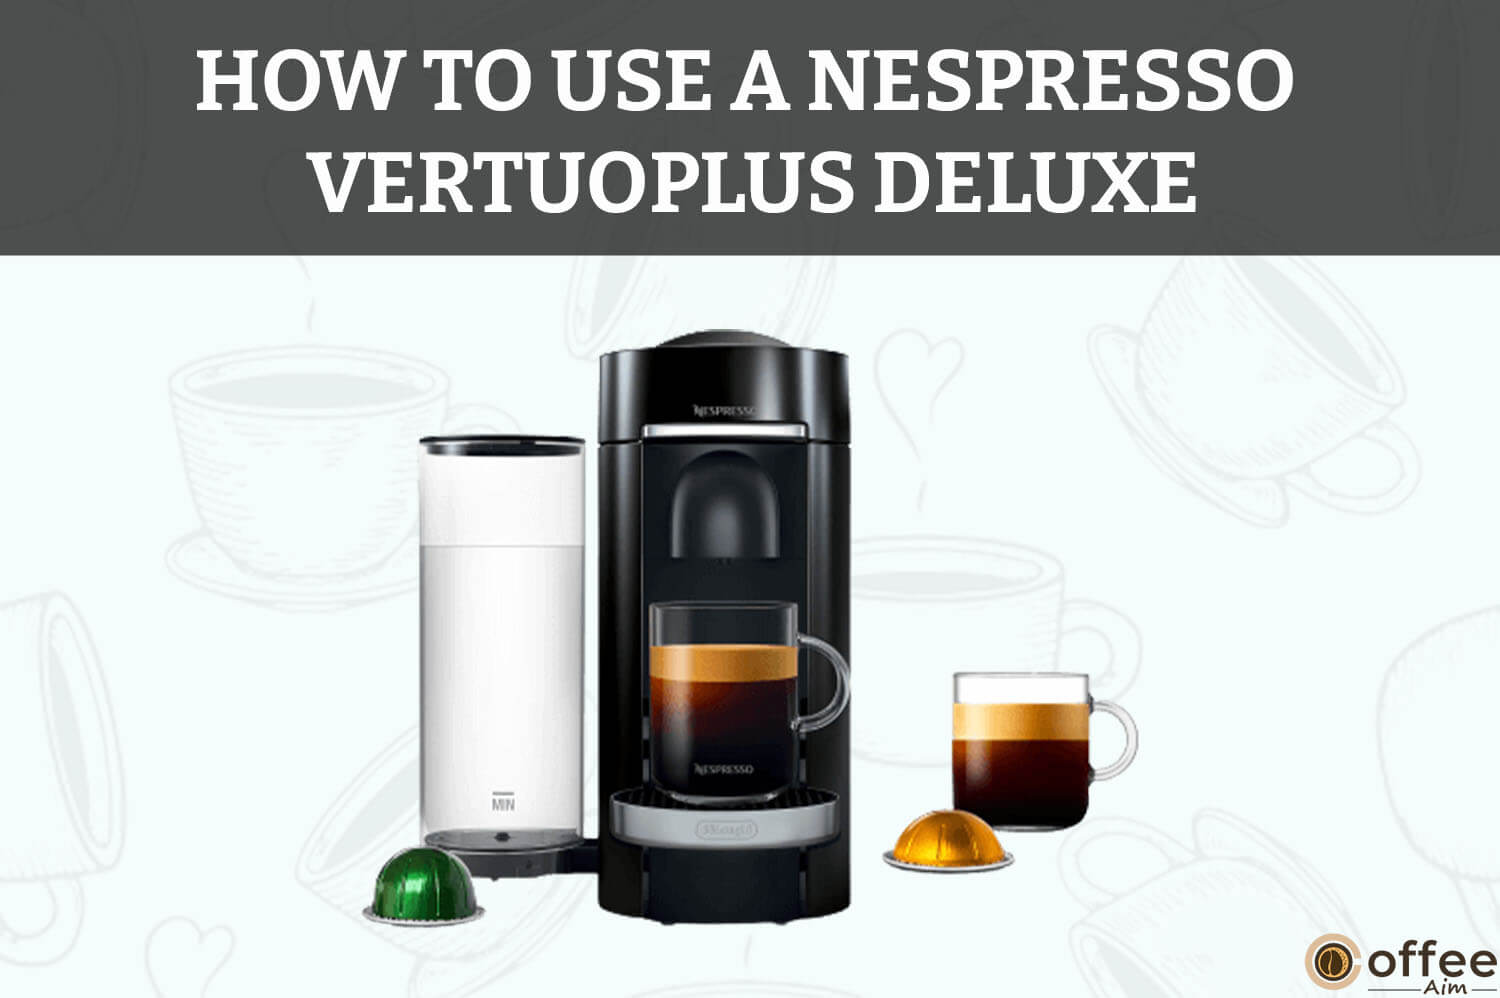 How-to-Use-A-Nespresso-Vertuo-Plus-Deluxe